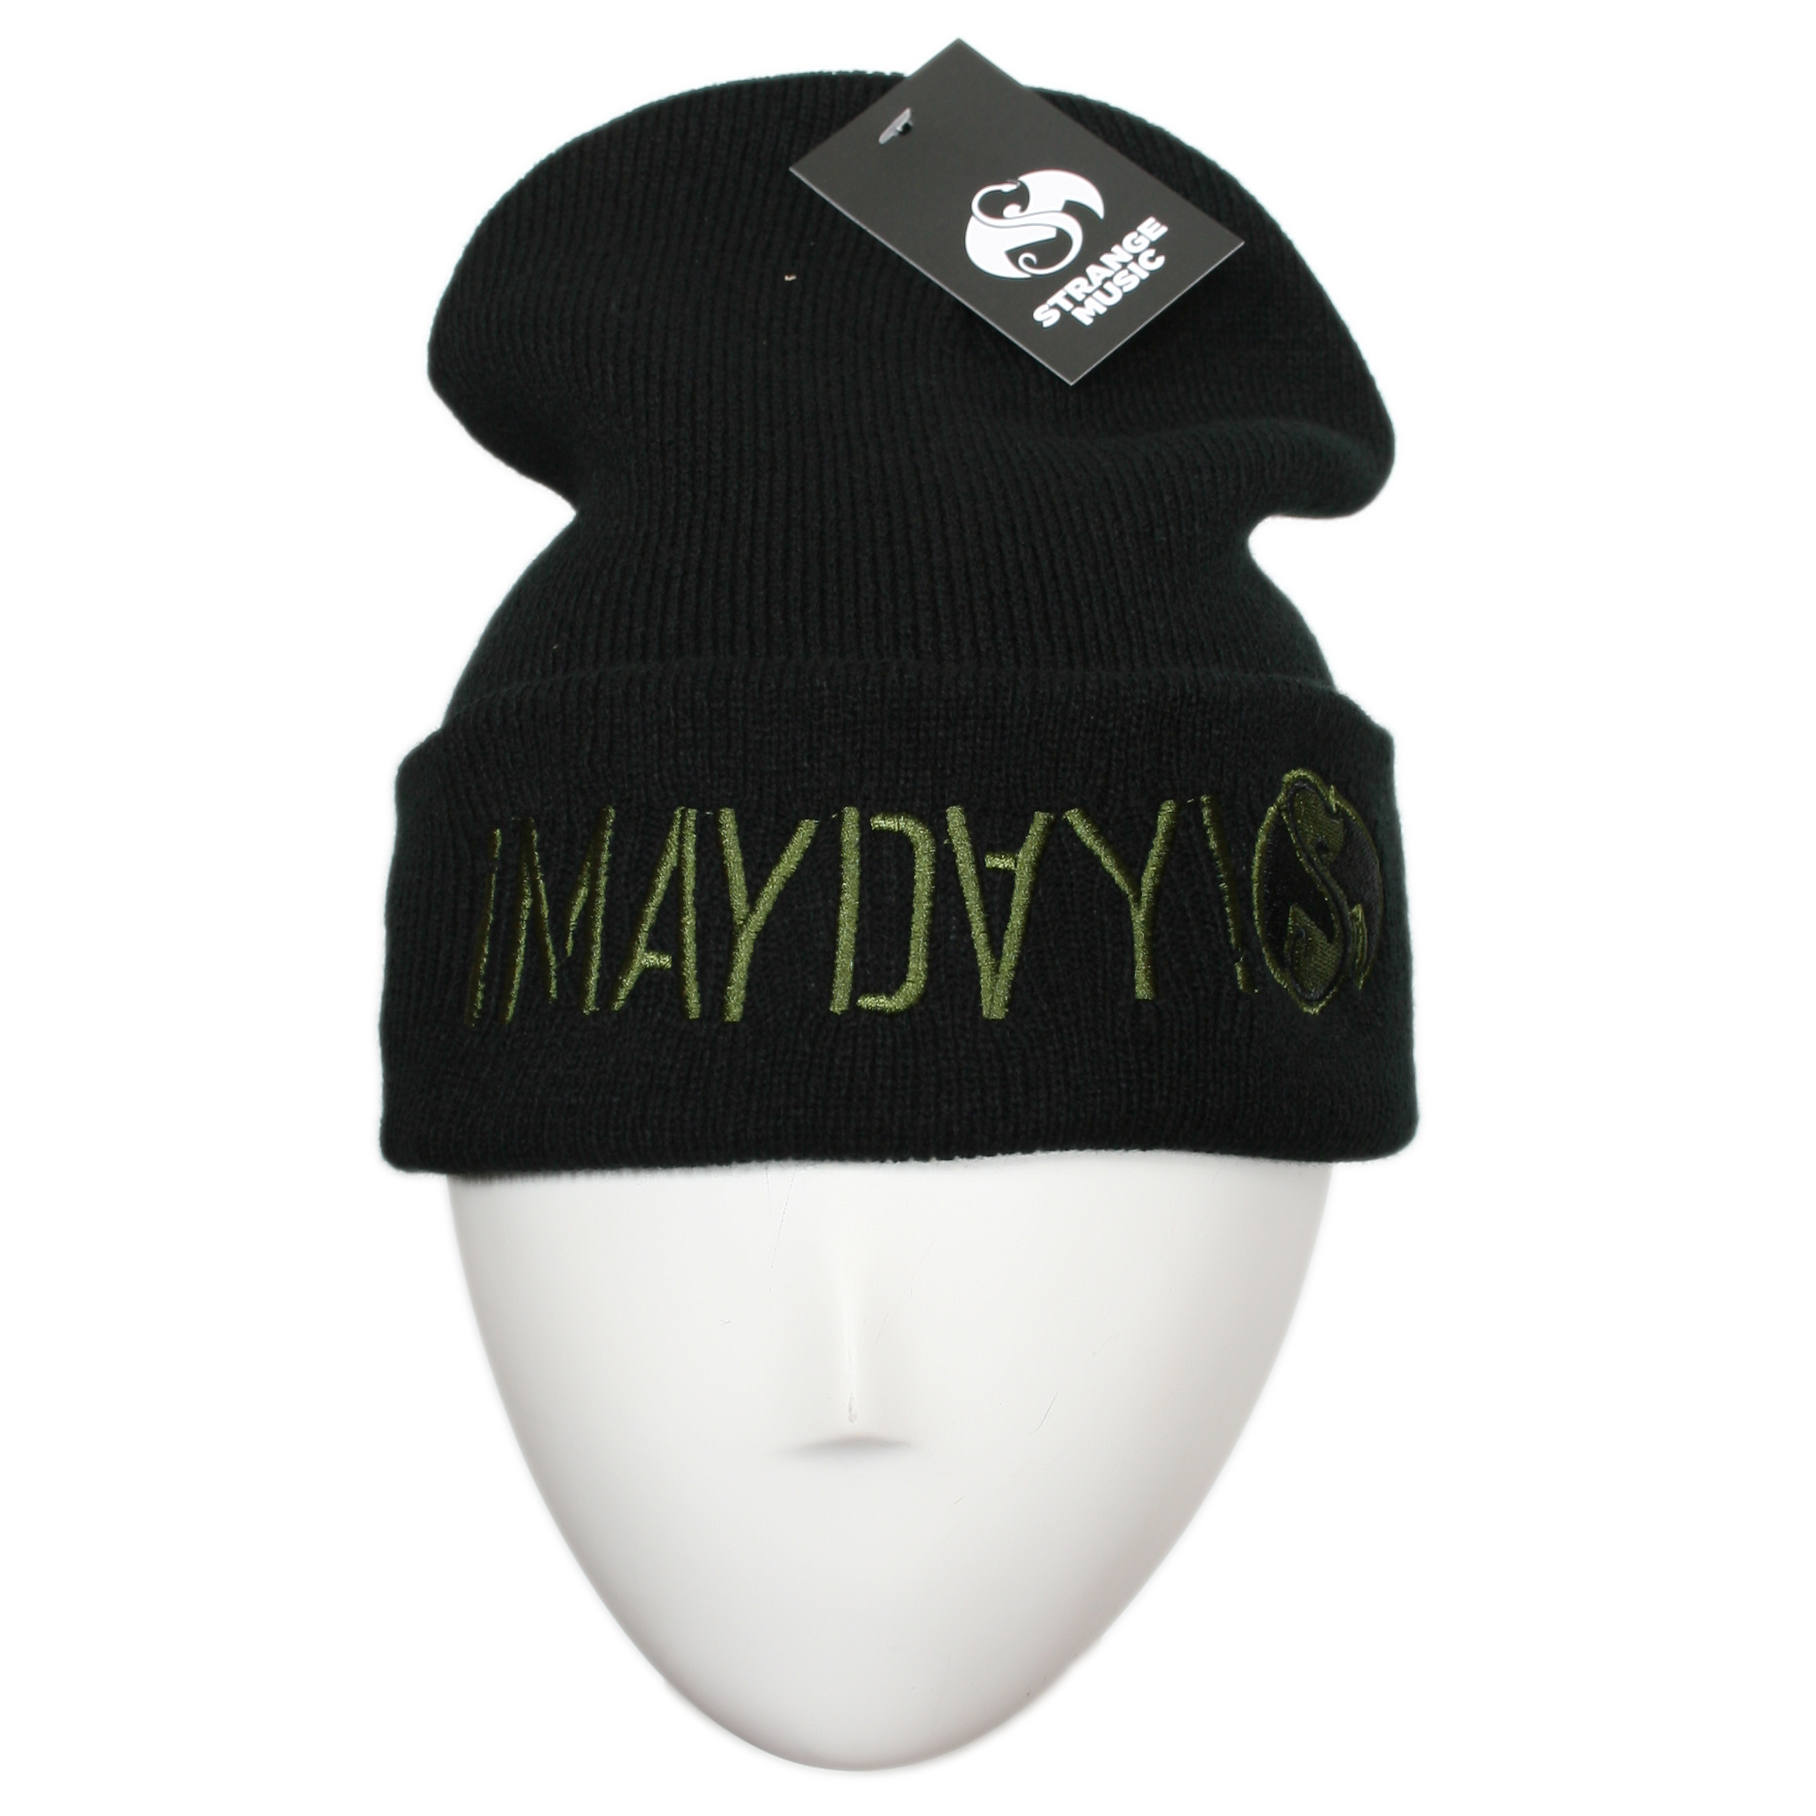 ¡MAYDAY!  - Black 2017 Embroidered Skull Cap